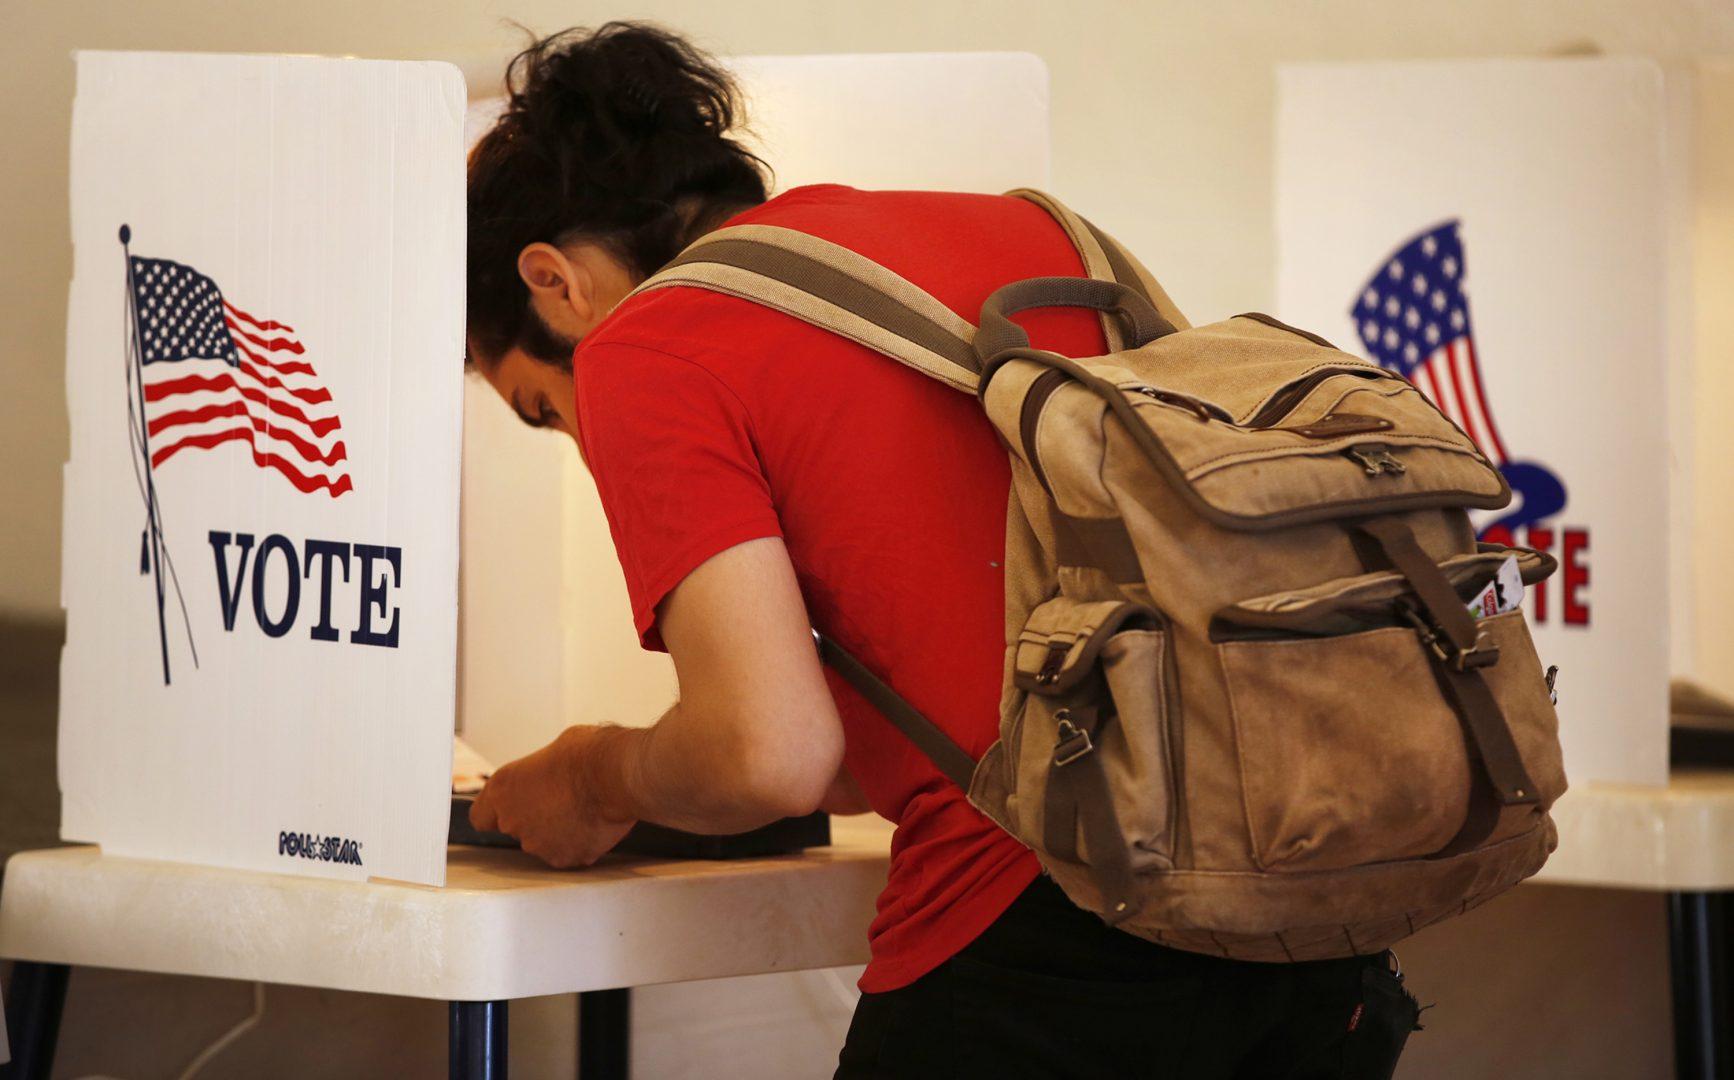 A voter heads to the polls in an April 2017 file image. In Maine, for the first time in U.S. history, a controversial voting system known as ranked choice is being used to decide a federal election. (Al Seib/Los Angeles Times/TNS)